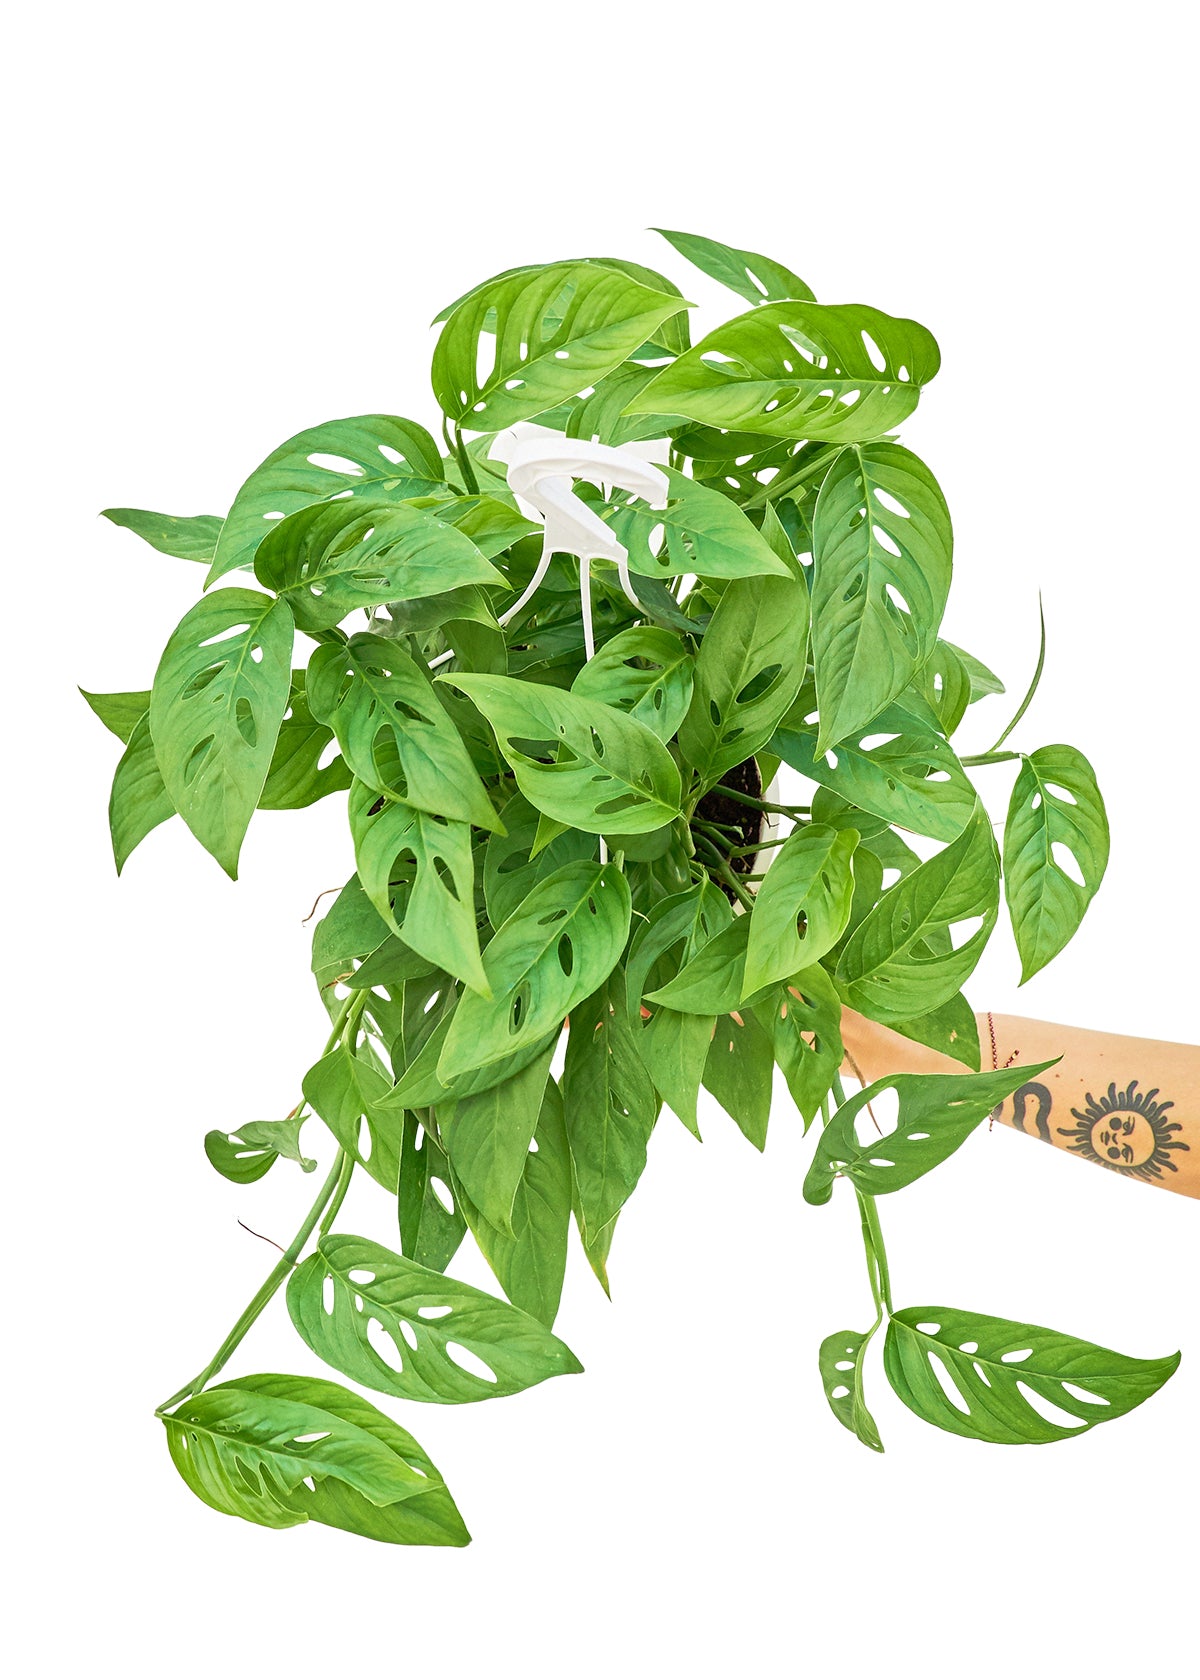 Large size Swiss Cheese Vine Hanging Plant in a growers pot with a white background with a hand holding the bottom of the pot to show the top view